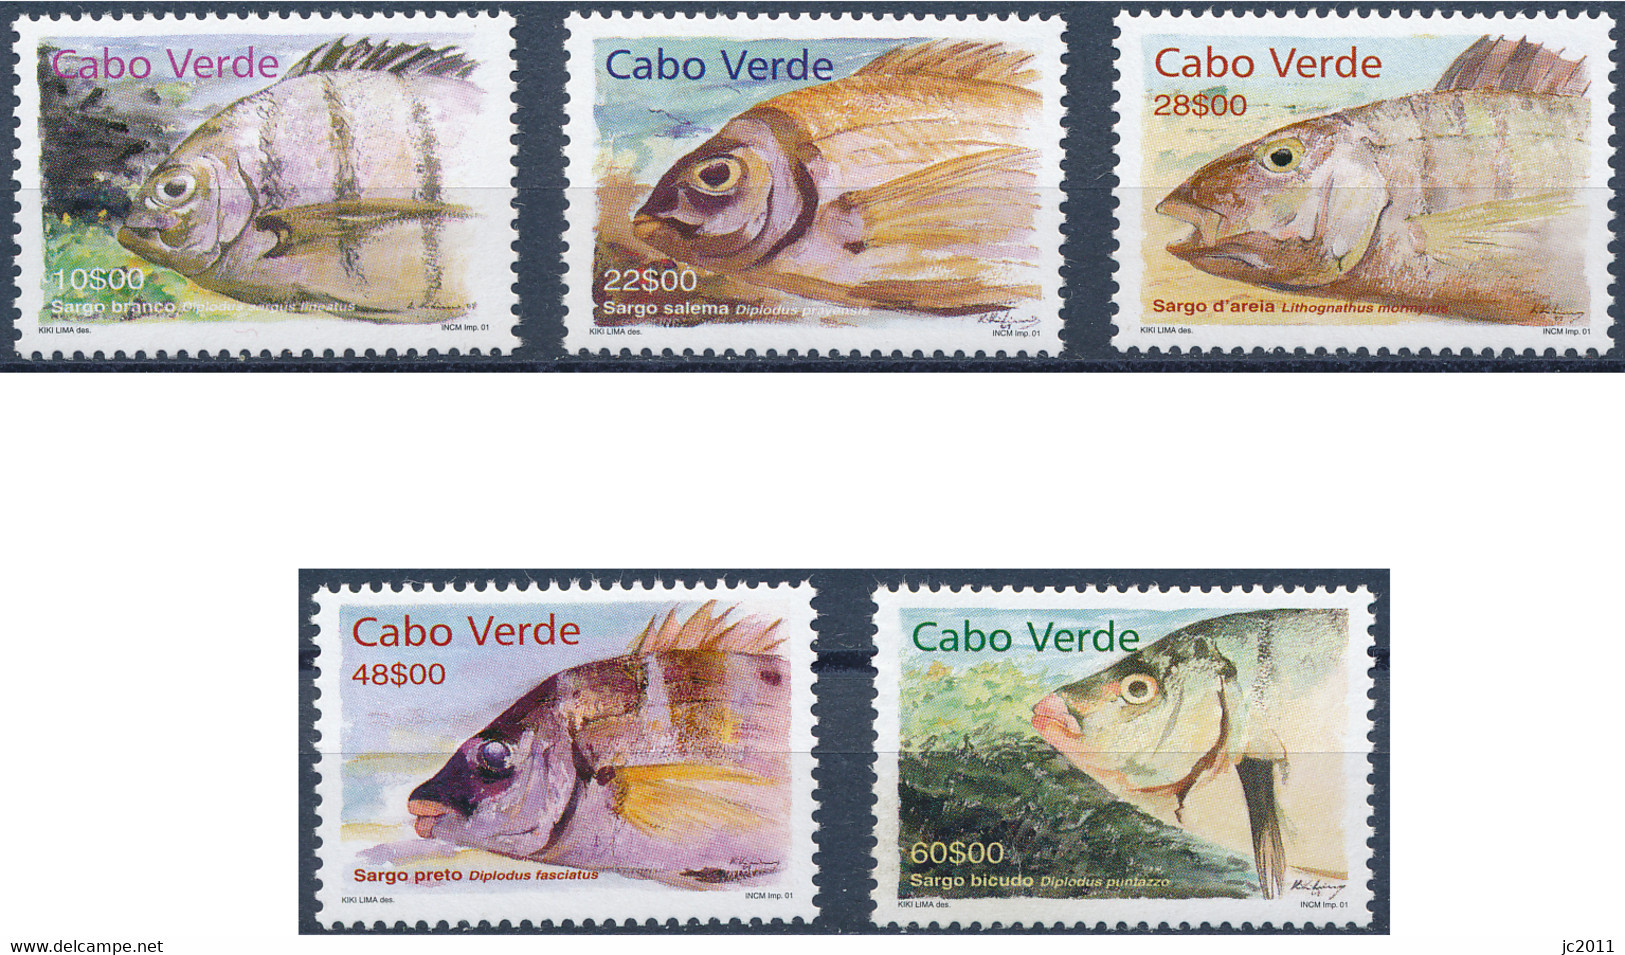 Cabo Verde - 2001 - Fishes - MNH - Cape Verde